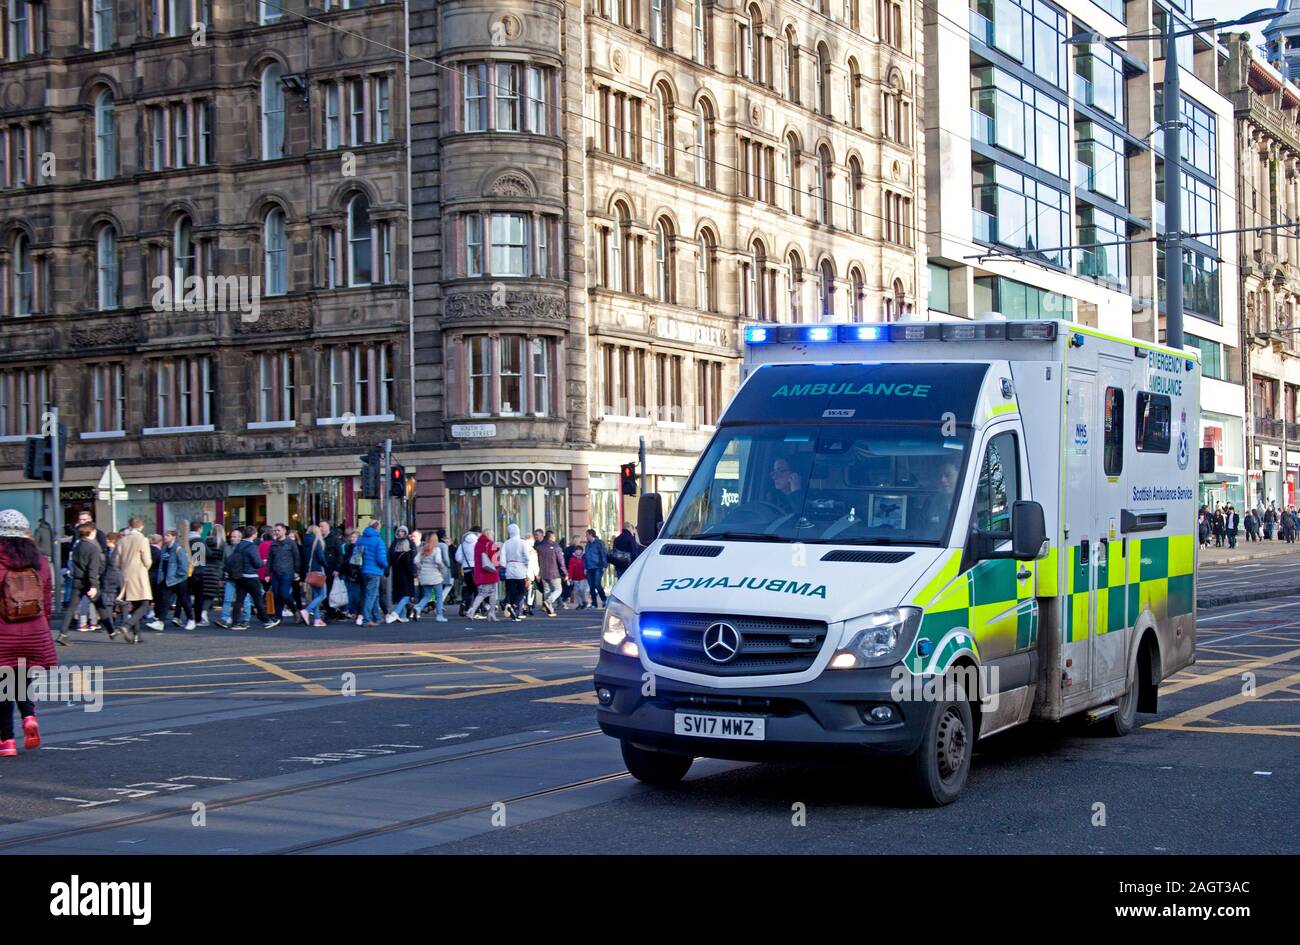 Princes Street, Edinburgh, Scotland, UK. 21st December 2019. Ambulance and Paramedic staff are needing to take more time off sick due to anxiety, stress and depression, from figures of Scottish Ambulance Service. The number of ambulance service staff signed off due to mental health issues has risen over the last three years. Credit: Arch White/Alamy Live News Stock Photo